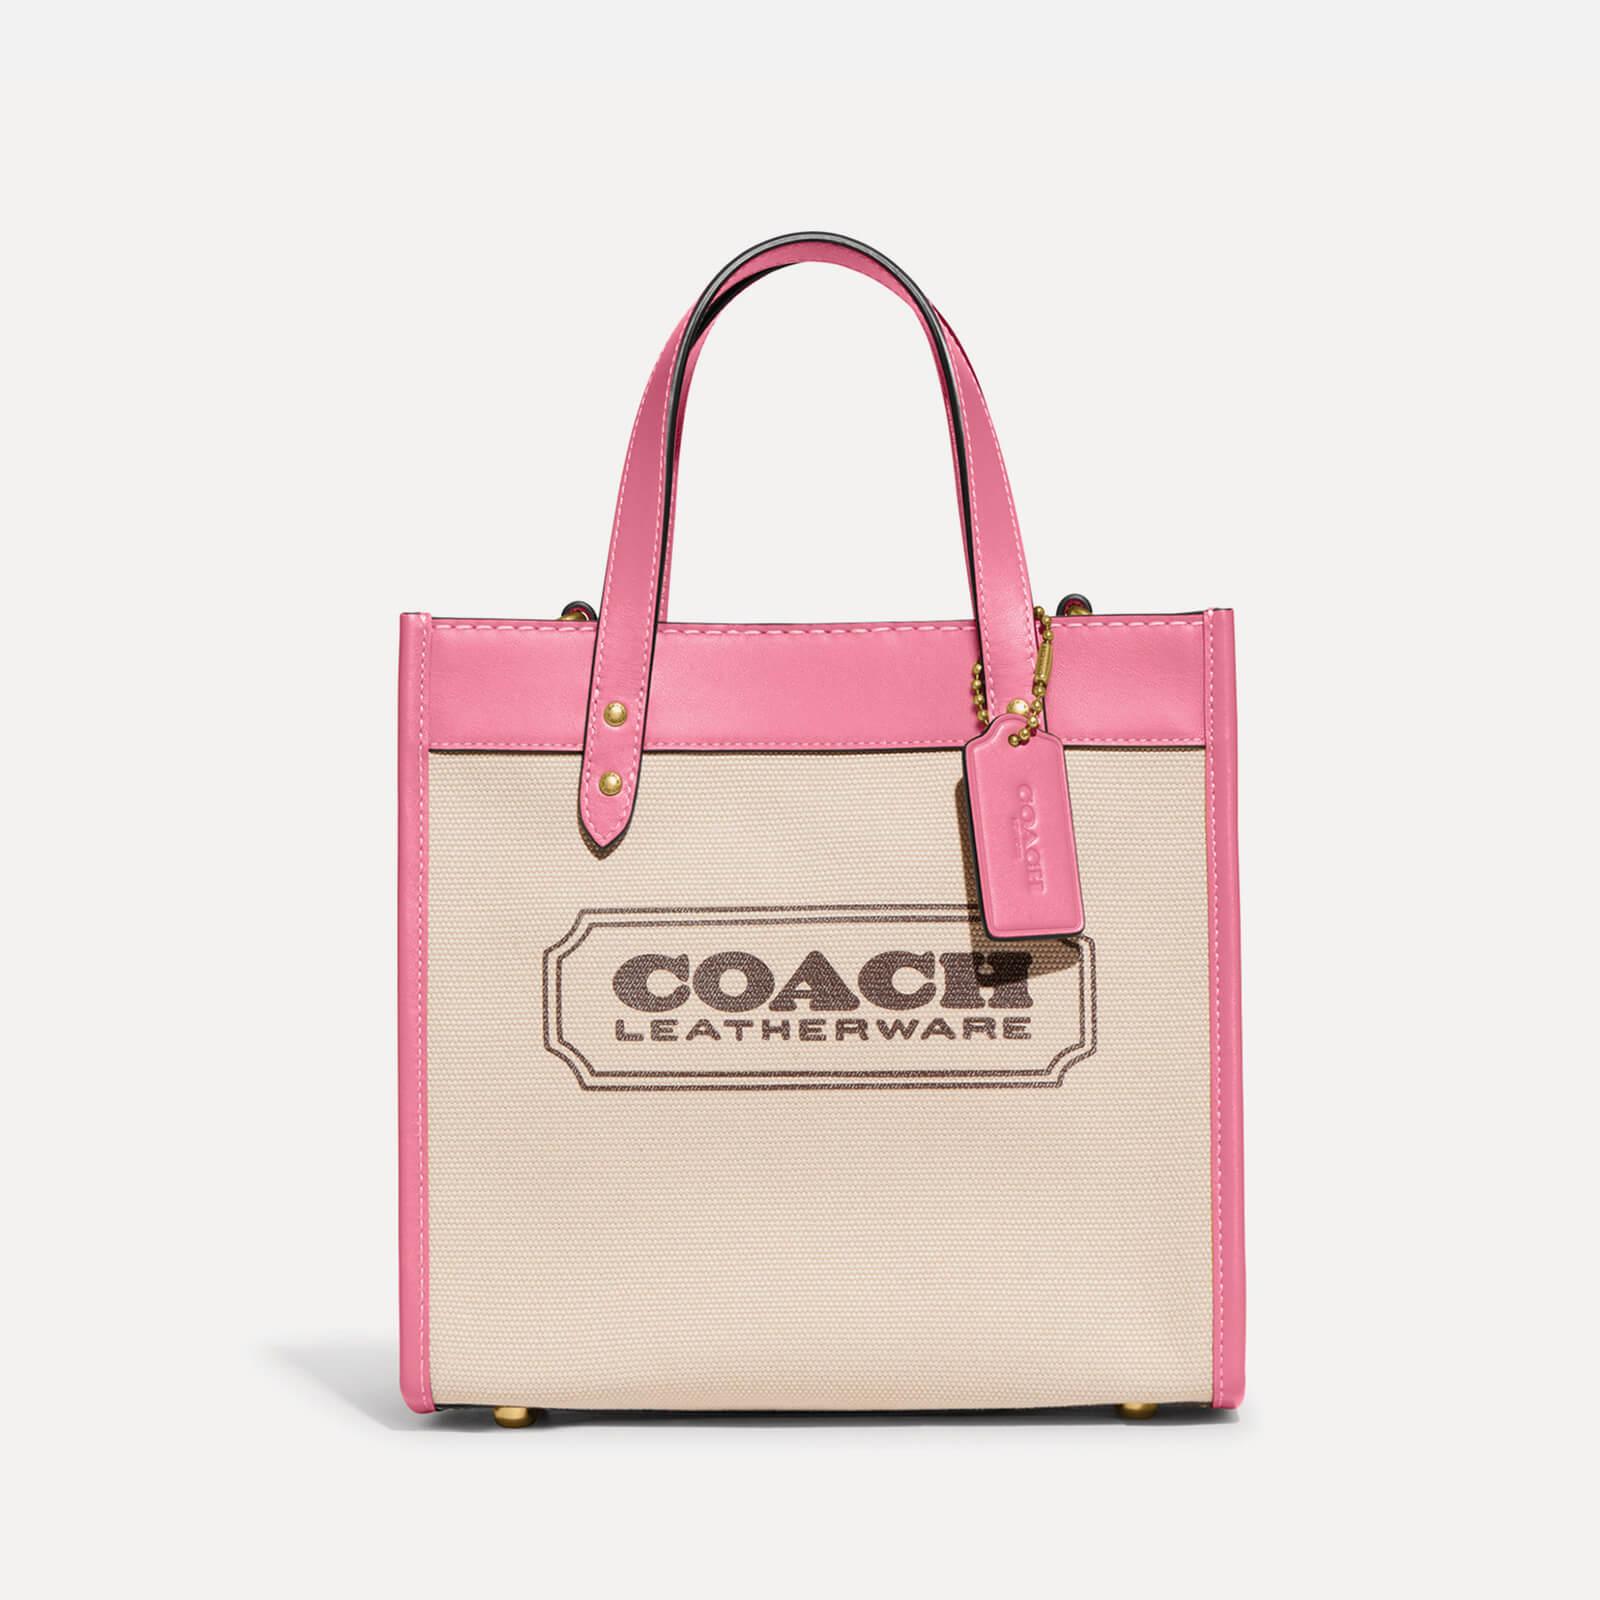 Coach Pink and White Canvas and Leather Shoulder Bag Purse *READ*